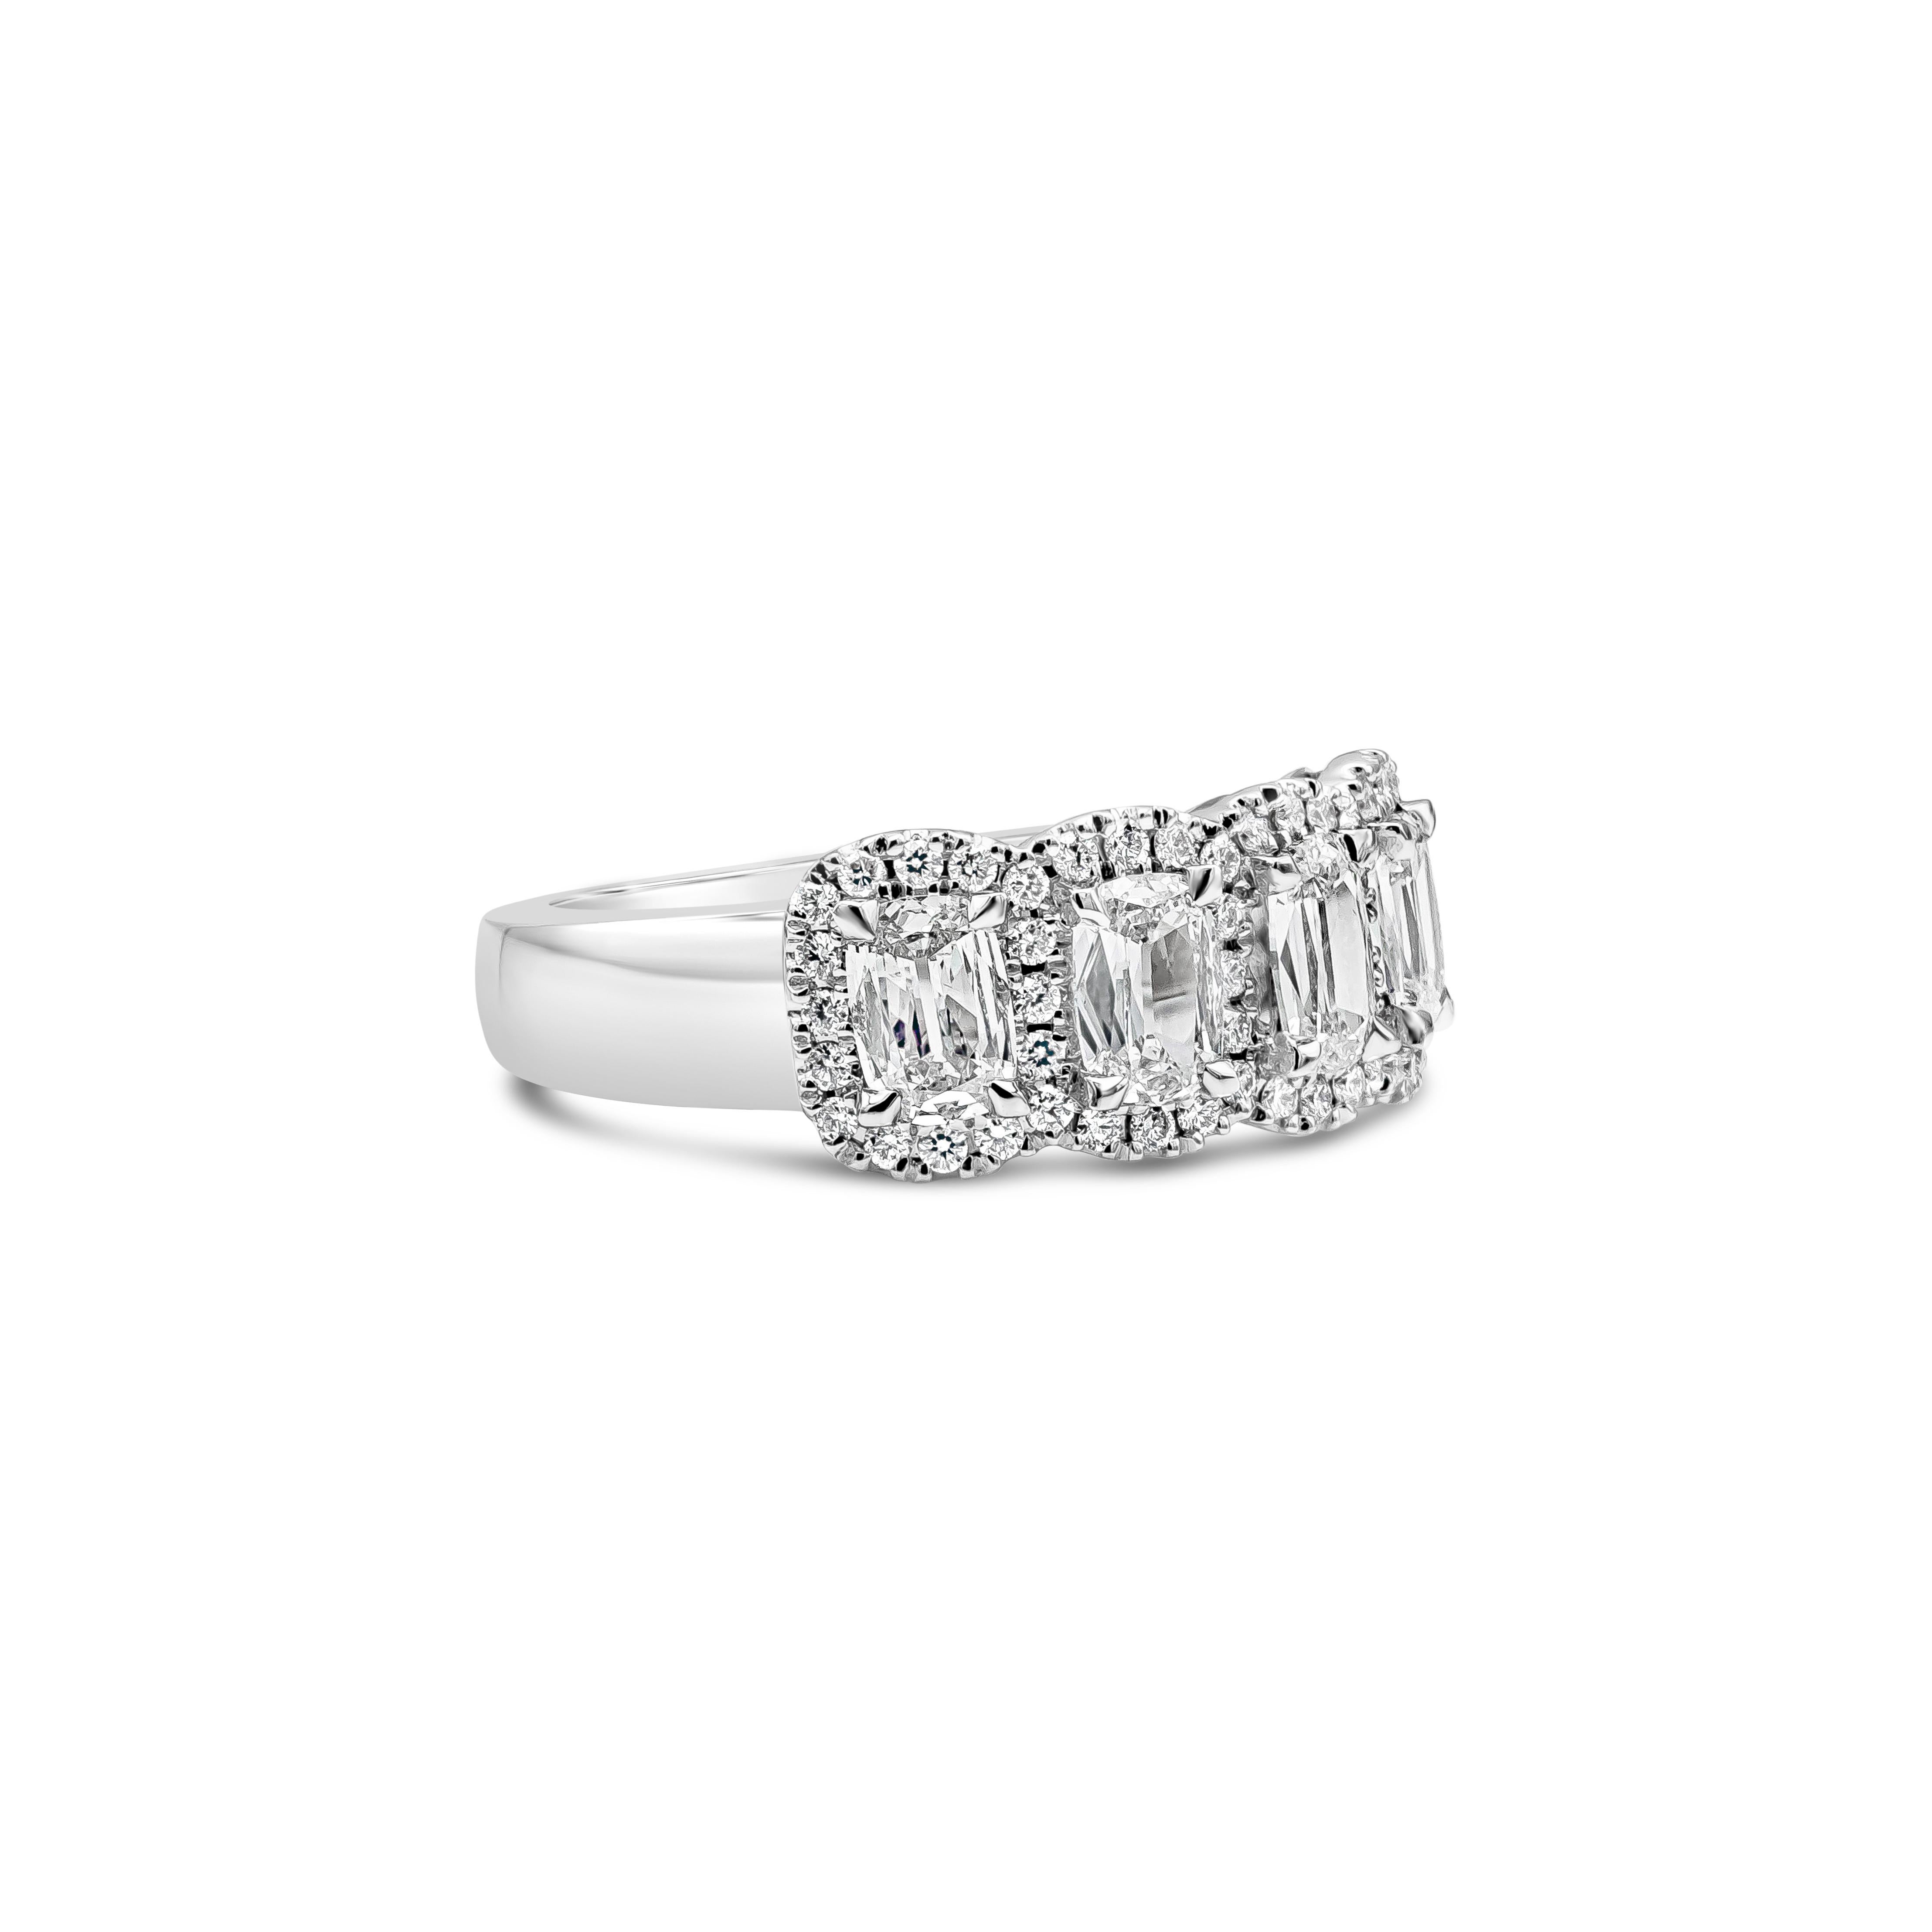 This piece of jewelry features four cushion cut diamonds weighing 1.15 carats in total, surrounded by a row of round brilliant diamonds that weighs about 0.26 carats in total. All diamonds are approximately F Color, VS in Clarity. Made with 18K